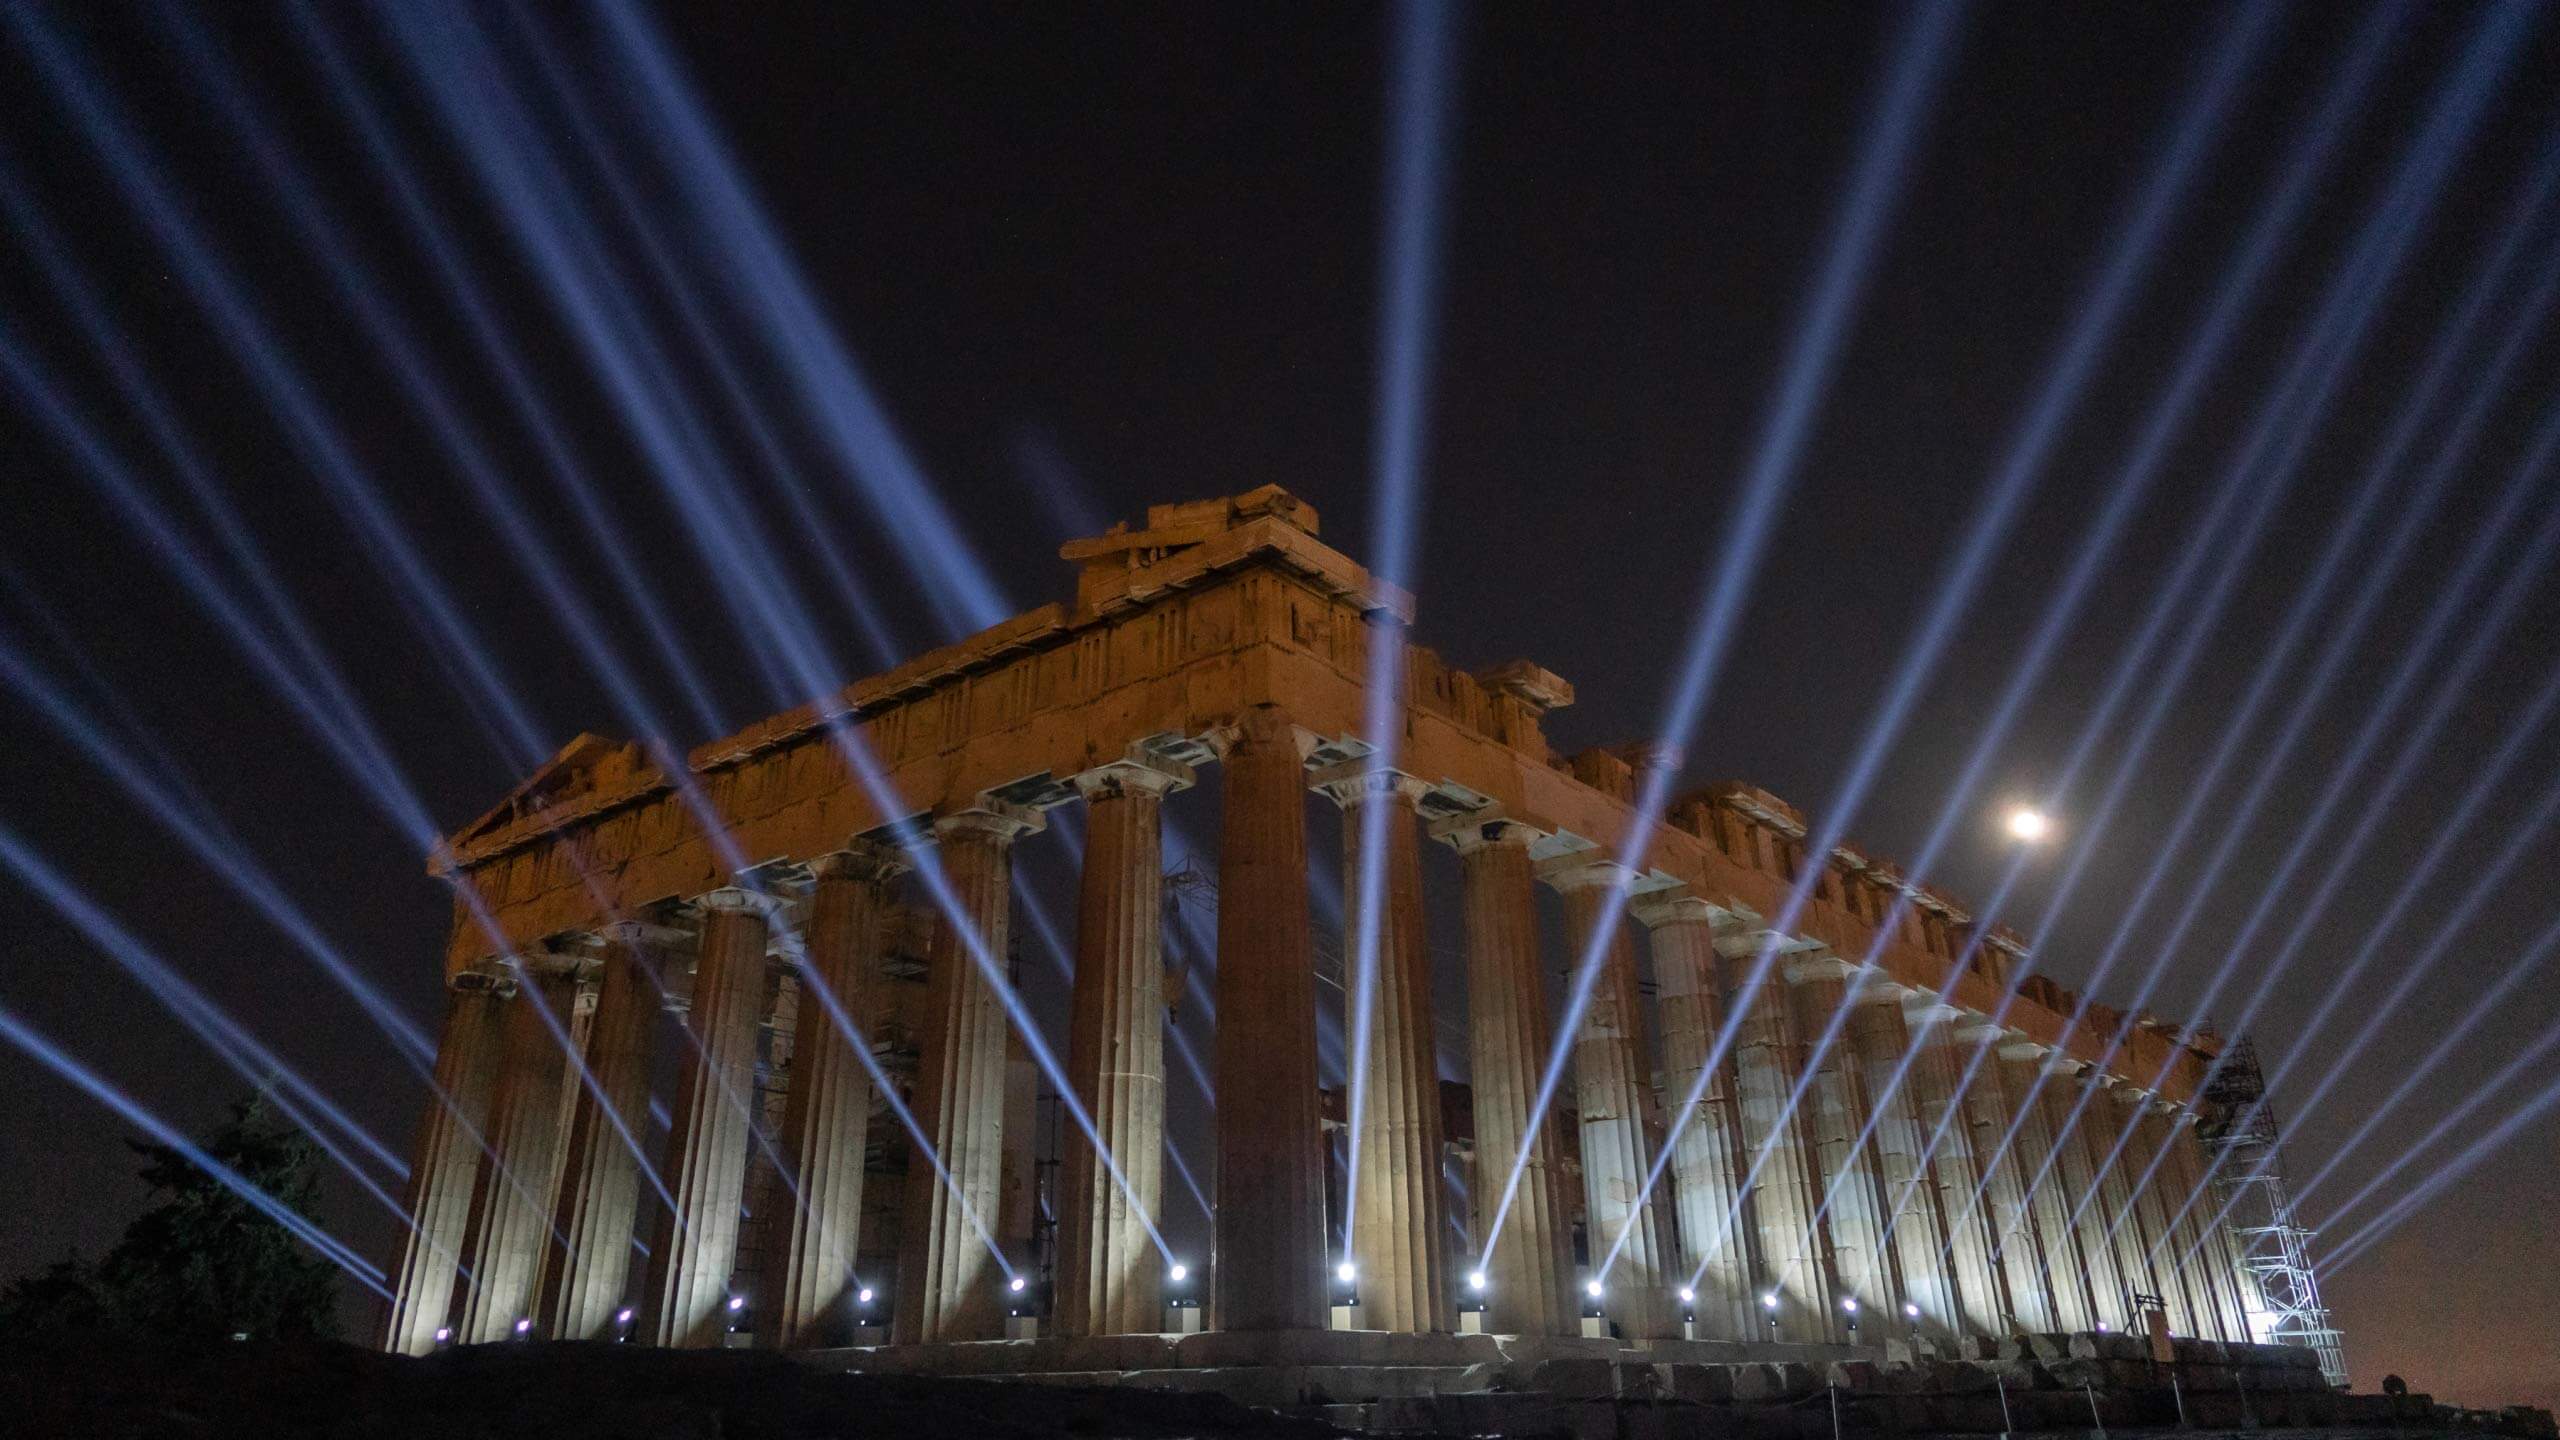 YARD-Presentation of the New Lighting of the Acropolis of Athens